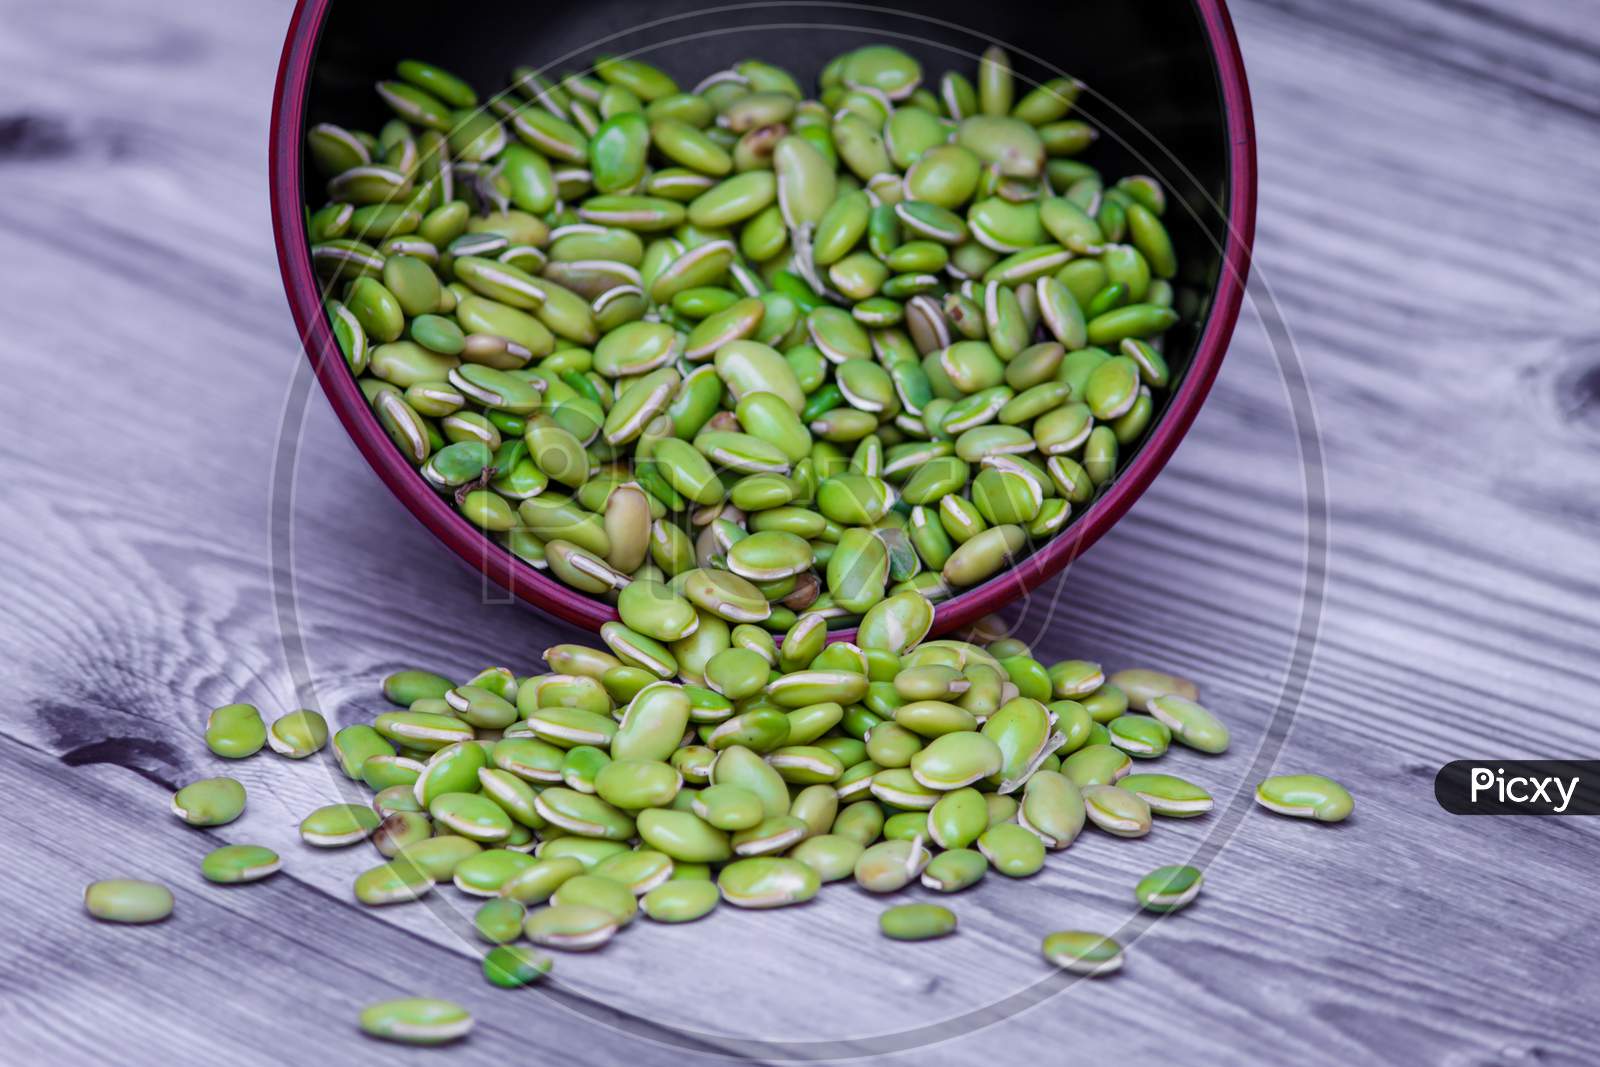 View Of Green Lima Beans (Also Known As Mocha Kottai In Tamil Language).